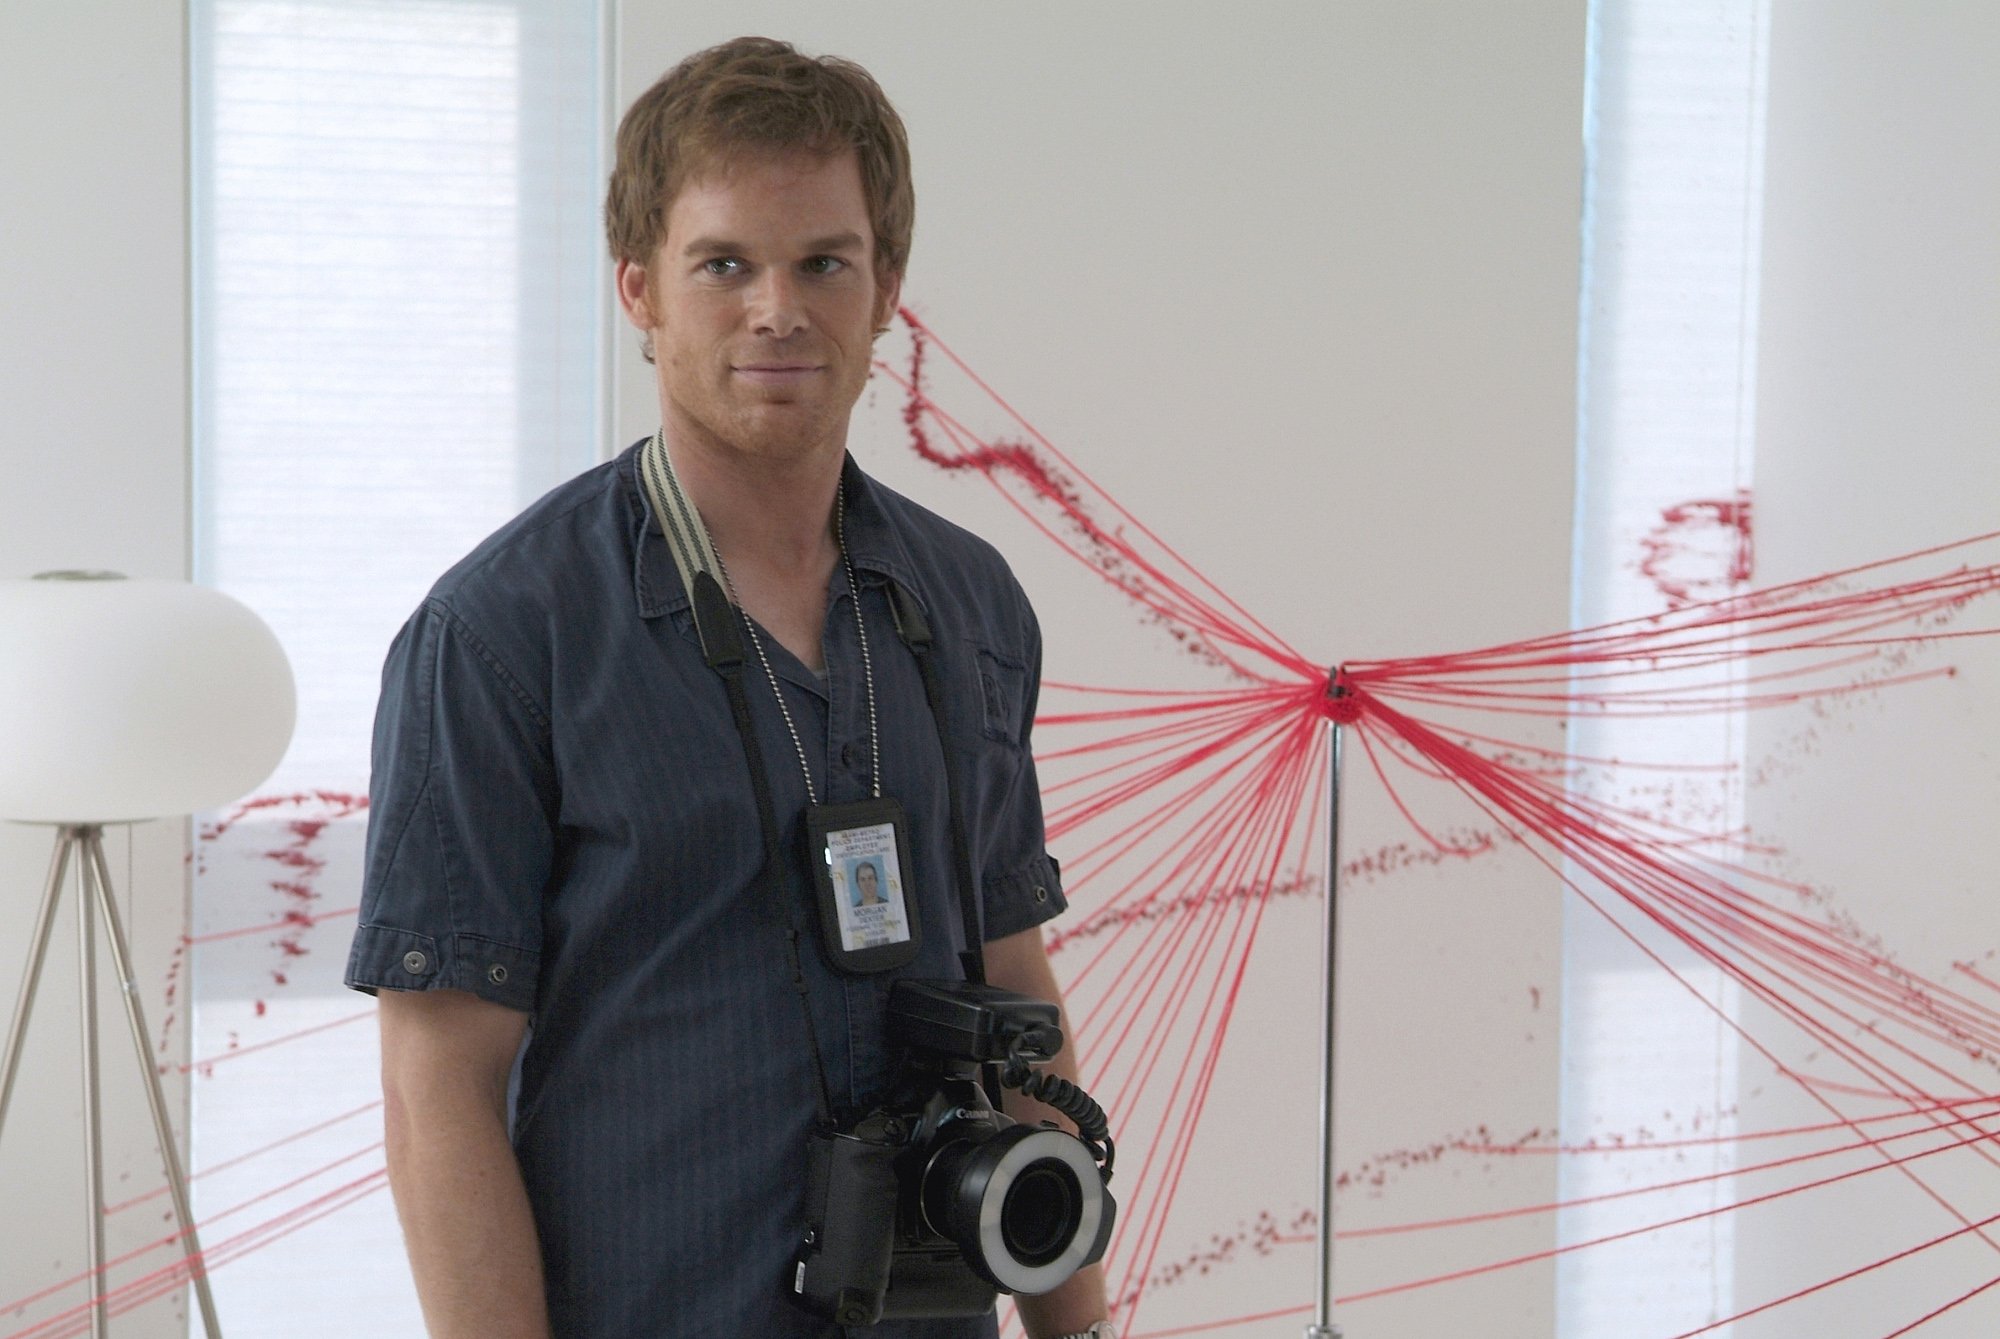 Michael C. Hall acts as Dexter Morgan in the Dexter pilot episode. Dexter stands at a crime scene with red string everywhere and a camera around his neck.